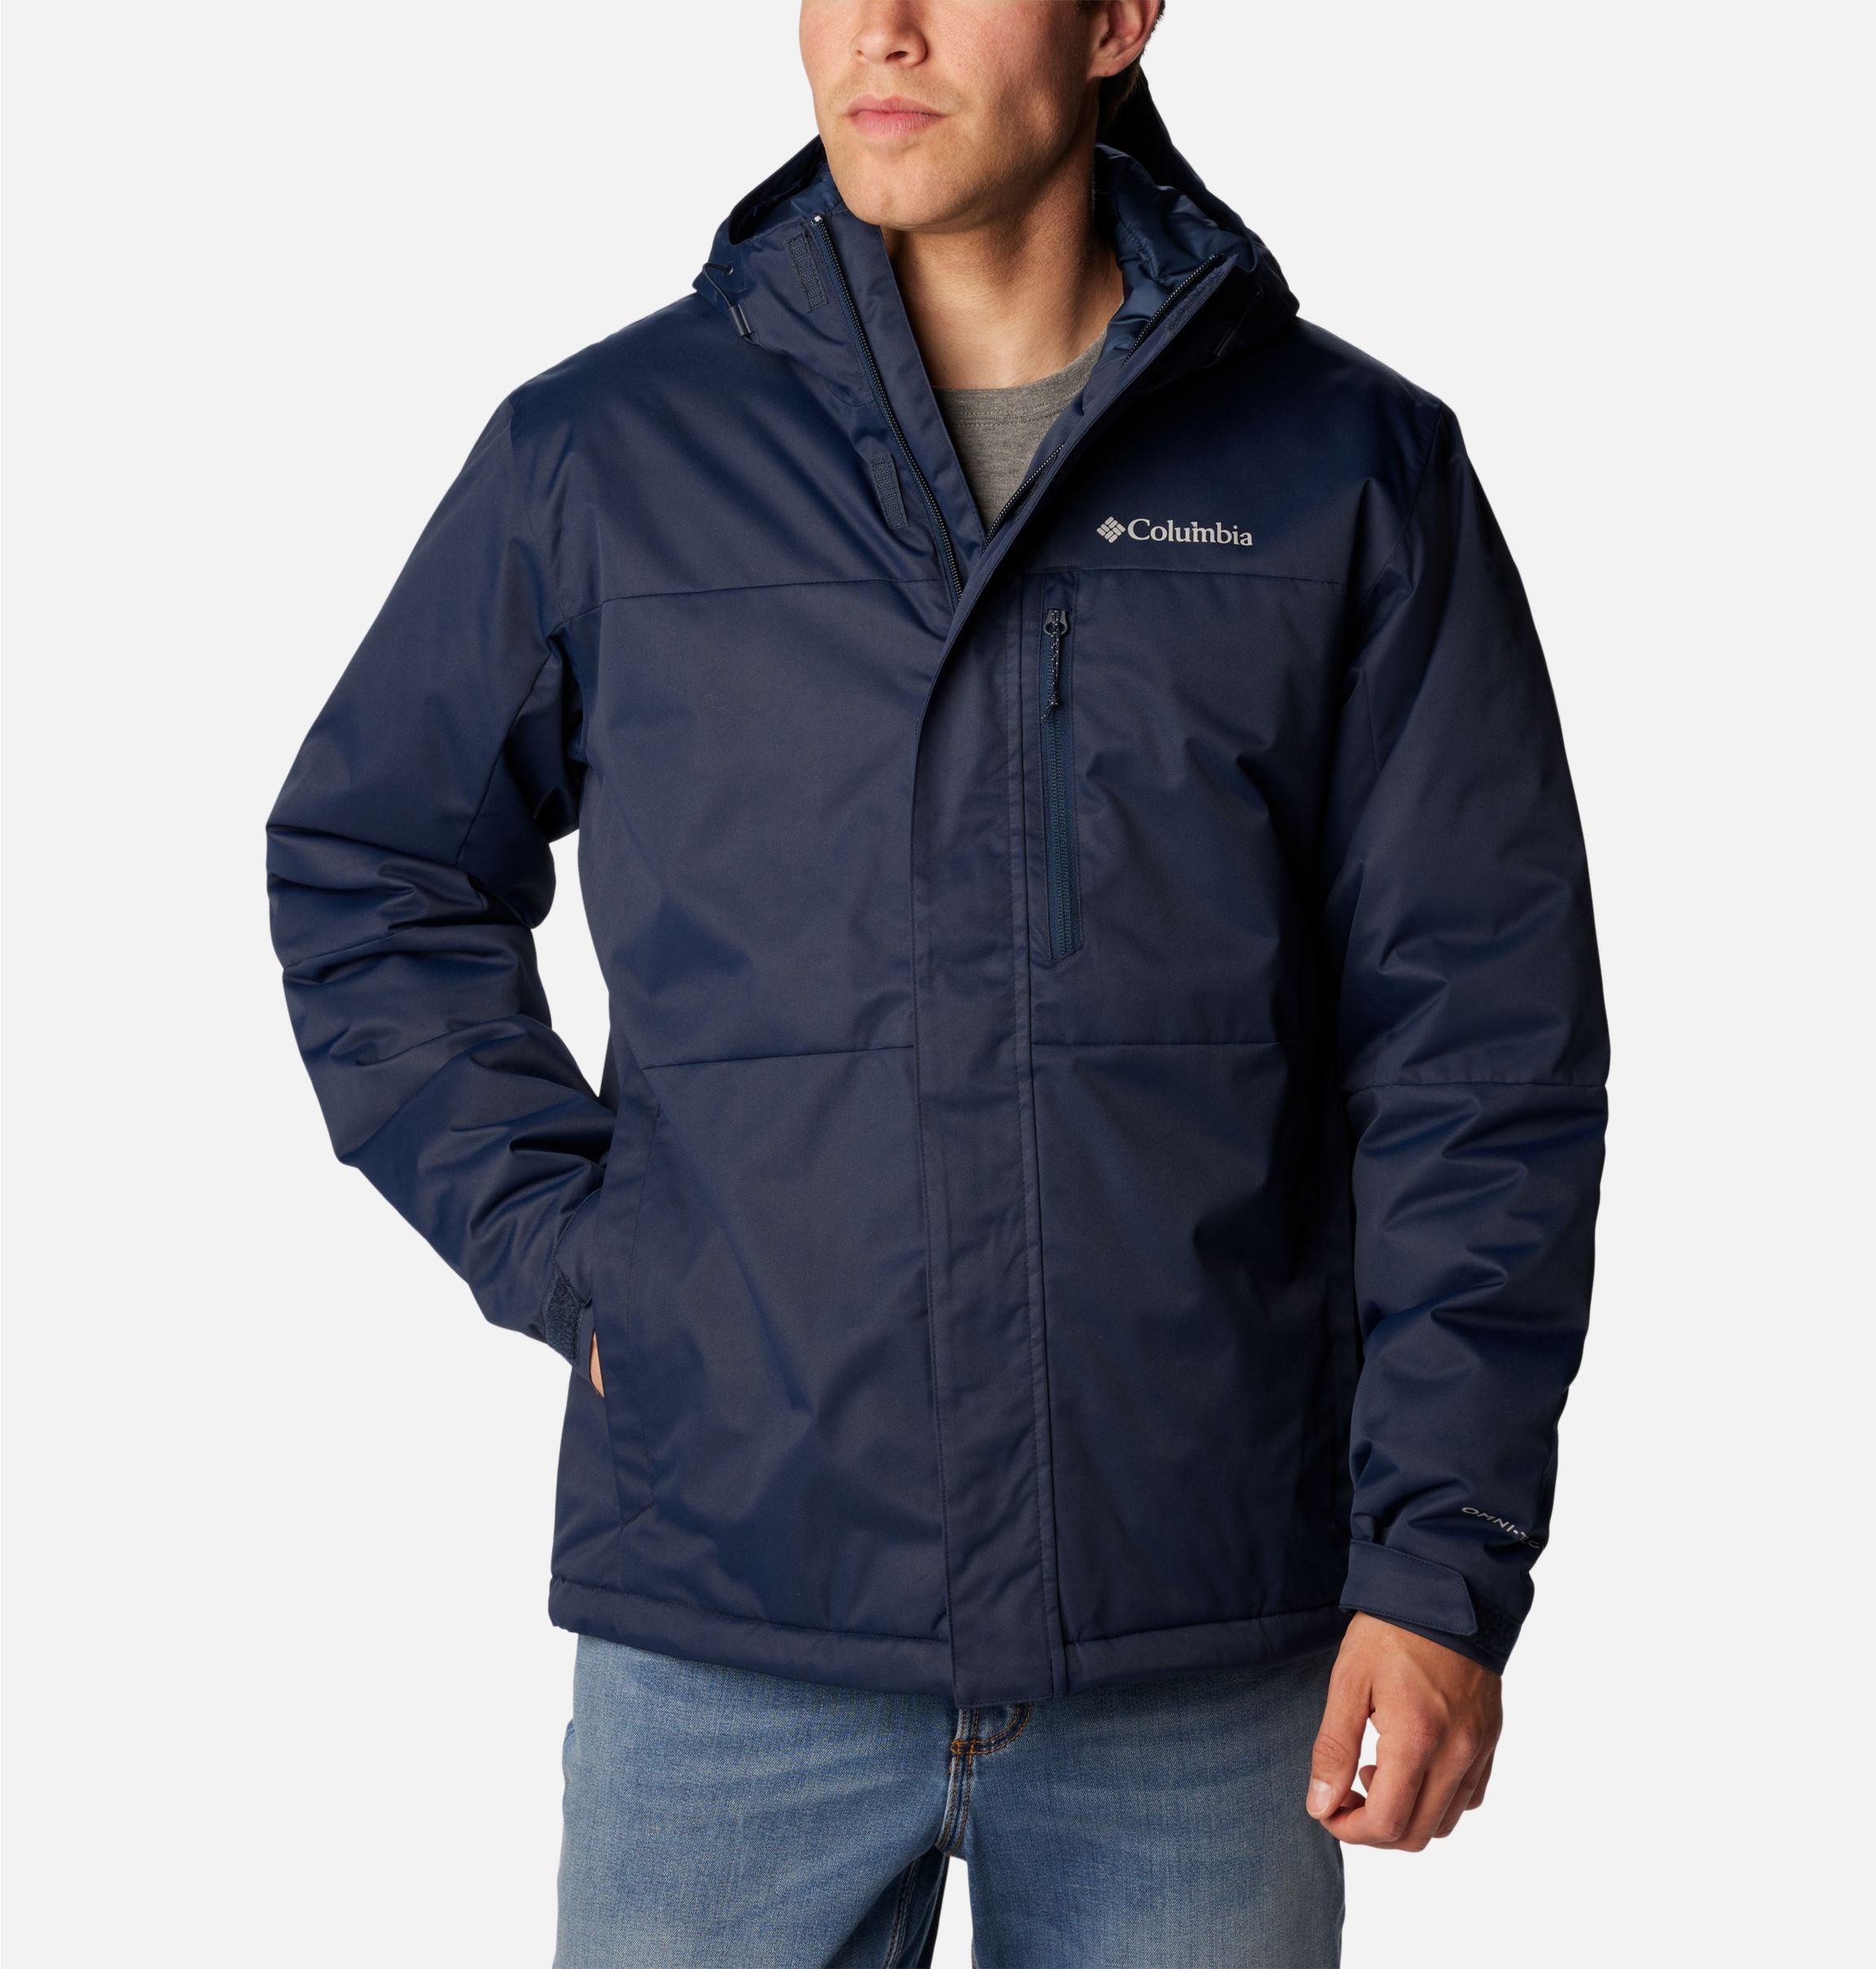 Columbia Hikebound Waterproof Insulated Jacket | COLUMBIA | Portwest - The Outdoor Shop